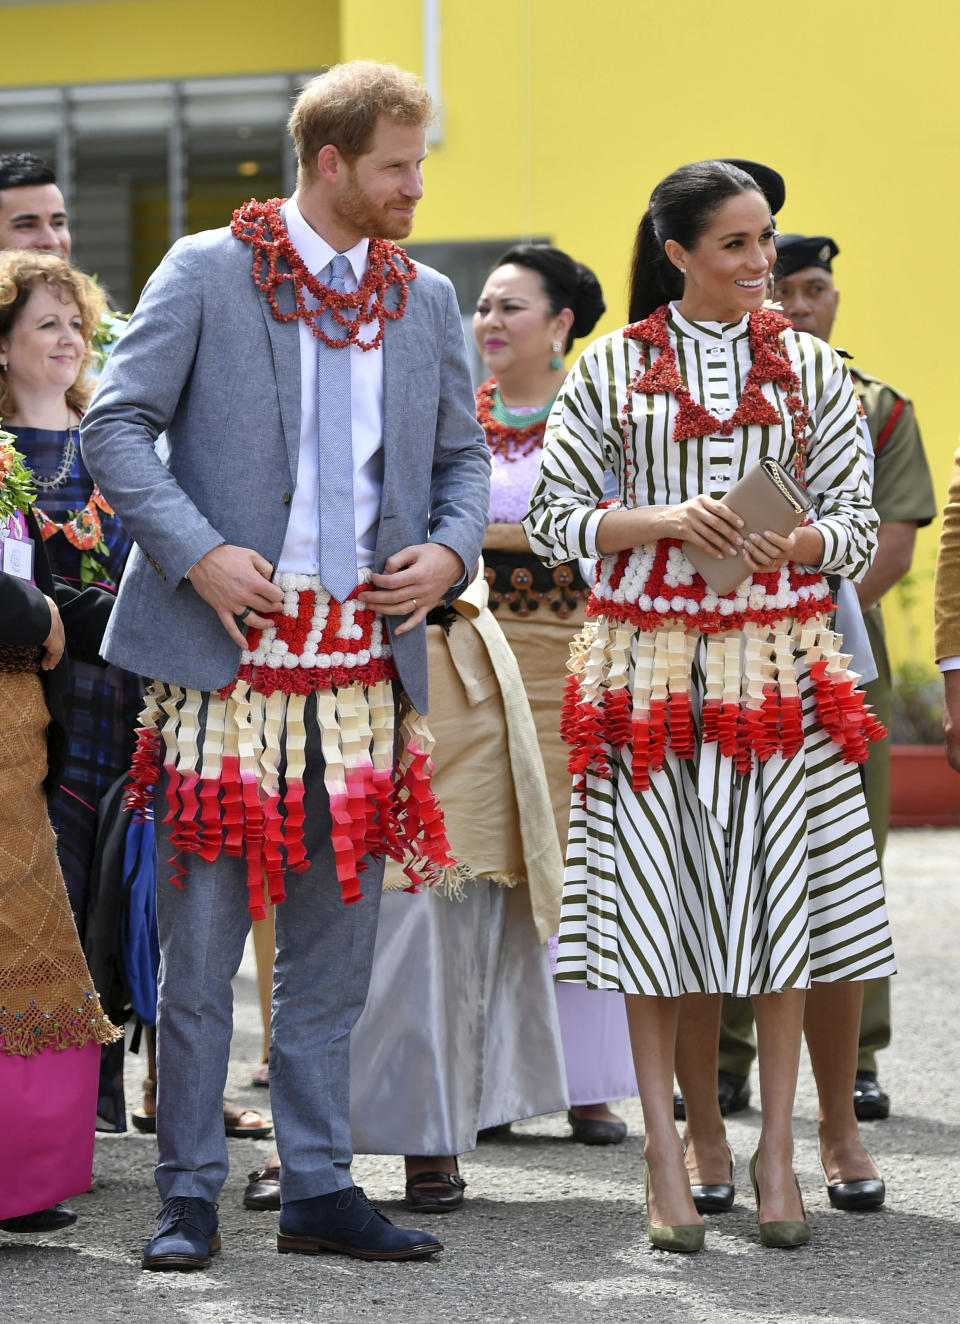 The Duke and Duchess of Sussex visit an exhibition of Tongan handicrafts, mats and tapa cloths at the Fa'onelua Convention Centre in Nuku'alofa, Tonga, Friday, Oct. 26, 2018. Prince Harry and his wife Meghan are on day 11 of their 16-day tour of Australia and the South Pacific. (Dominic Lipinski/Pool Photo via AP)